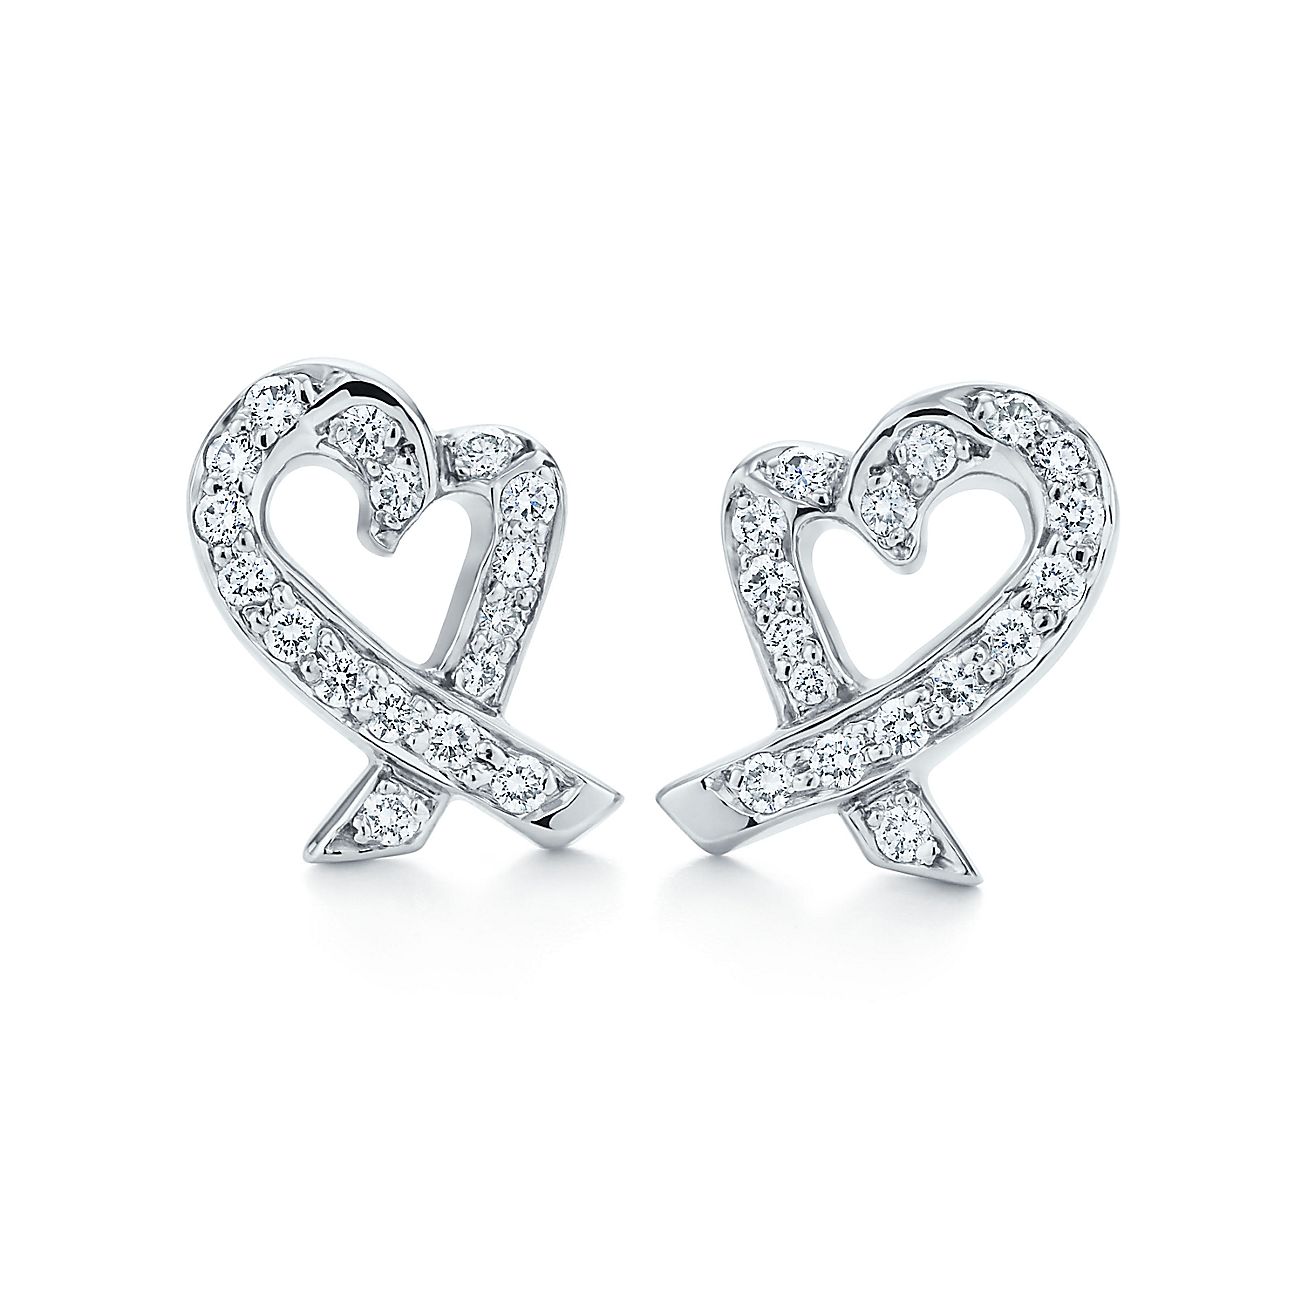 Paloma Picasso® Loving Heart earrings with pavé diamonds in platinum ...